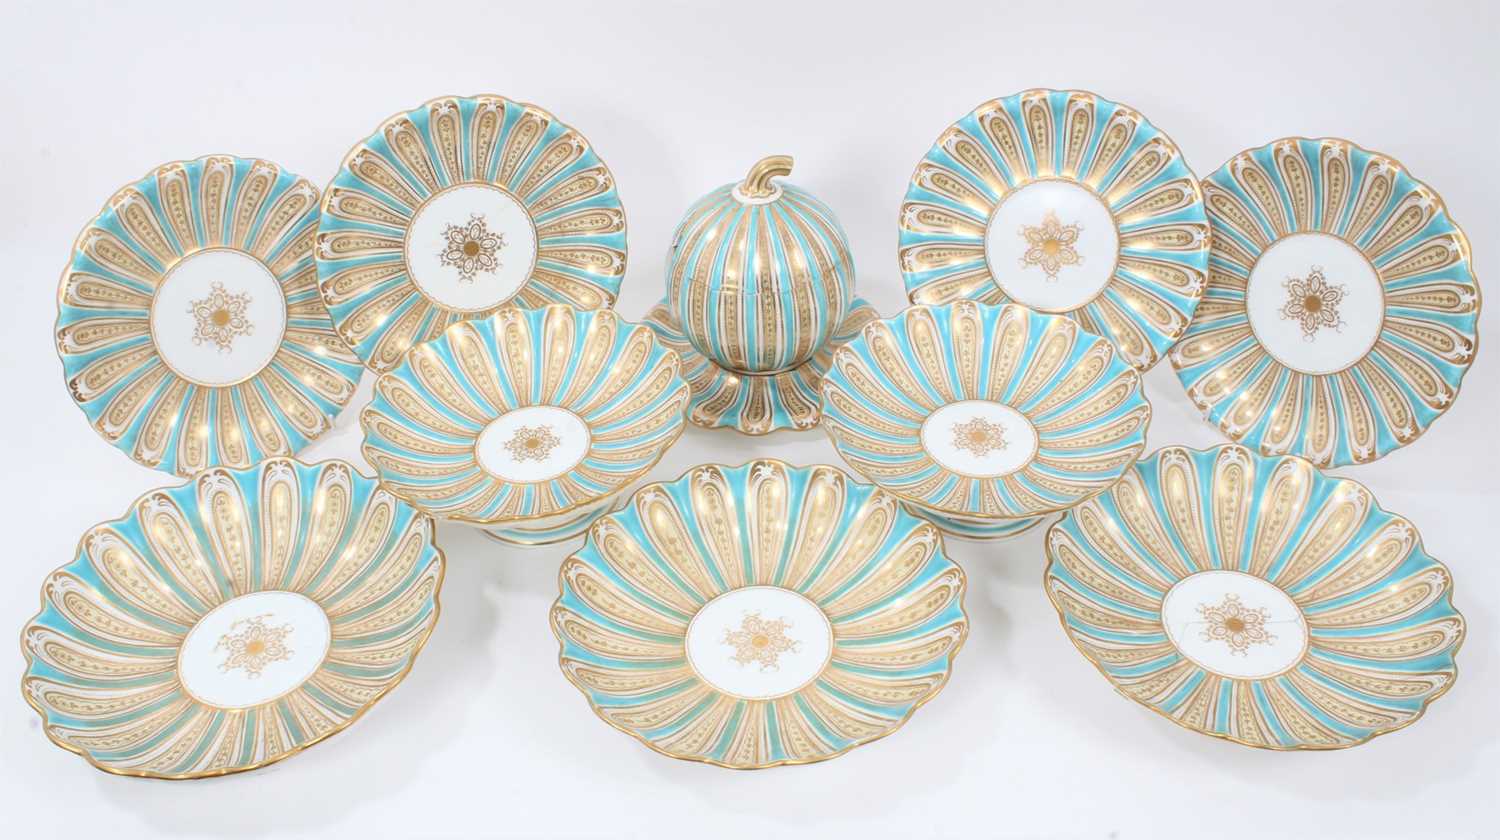 Lot 88 - 19th century Davenport porcelain dessert service on turquoise and gold ground